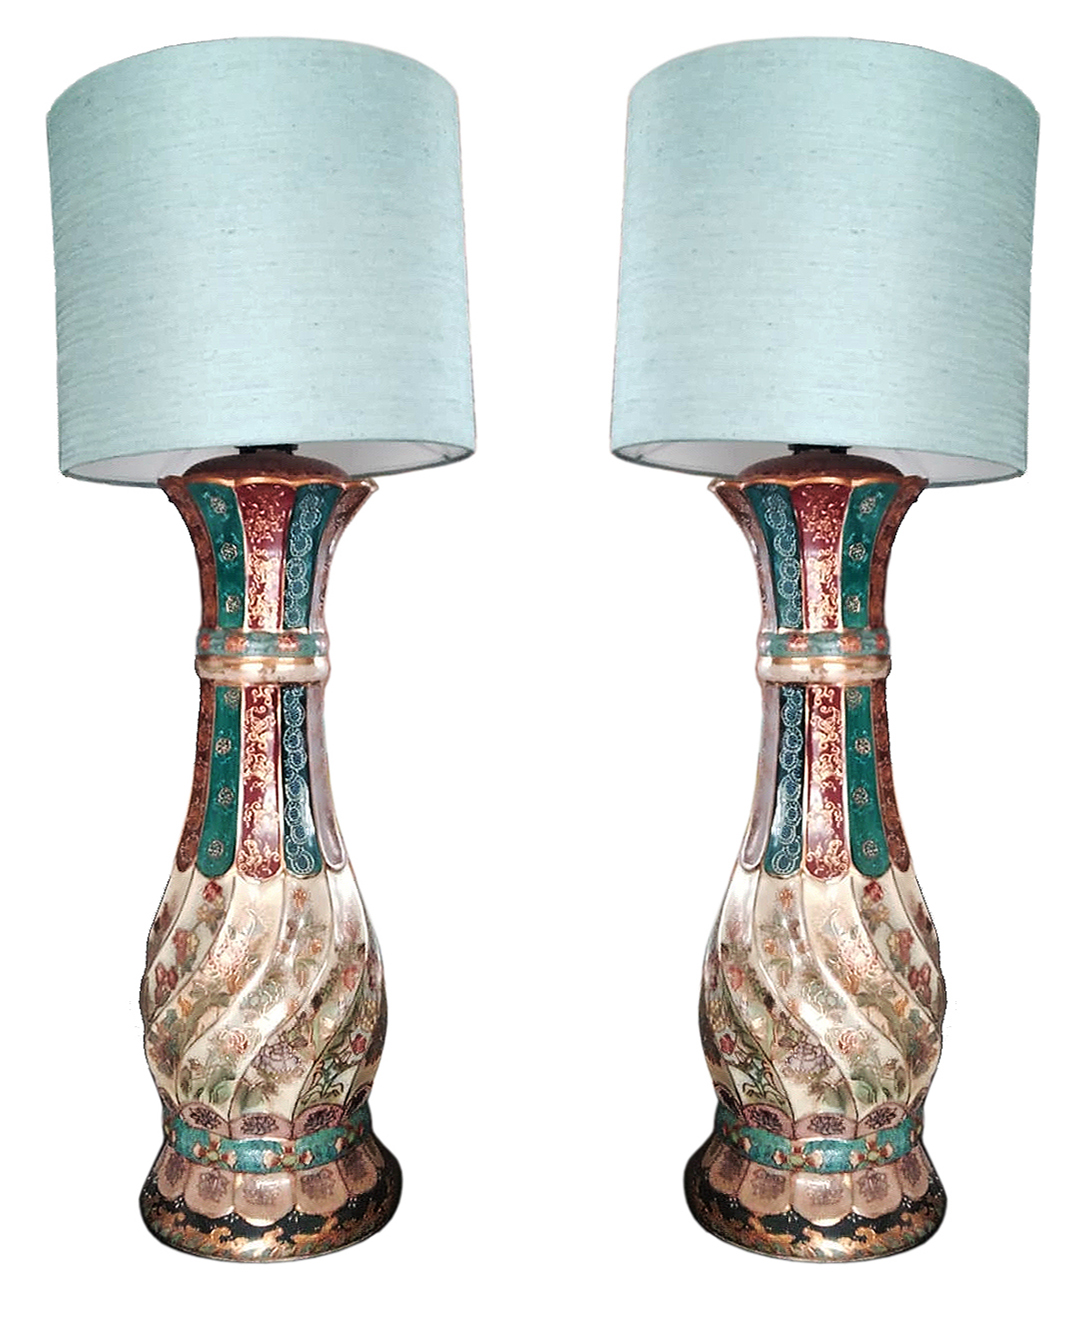 A pair of table lamps with ceramic vase stands and lamp shades